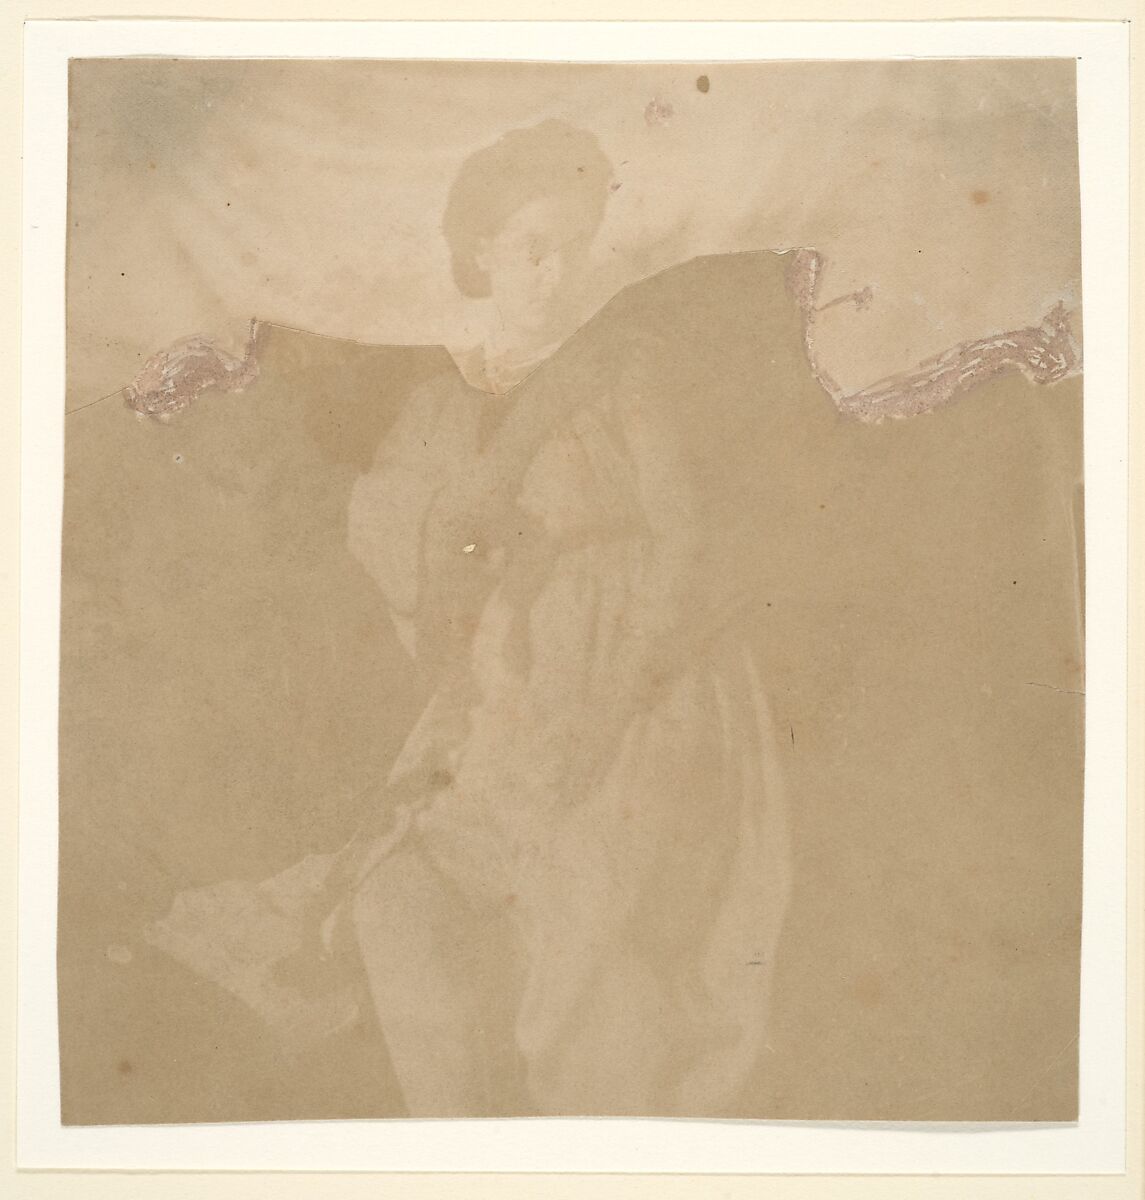 La Coucher, Pierre-Louis Pierson (French, 1822–1913), Salted paper print from glass negative 